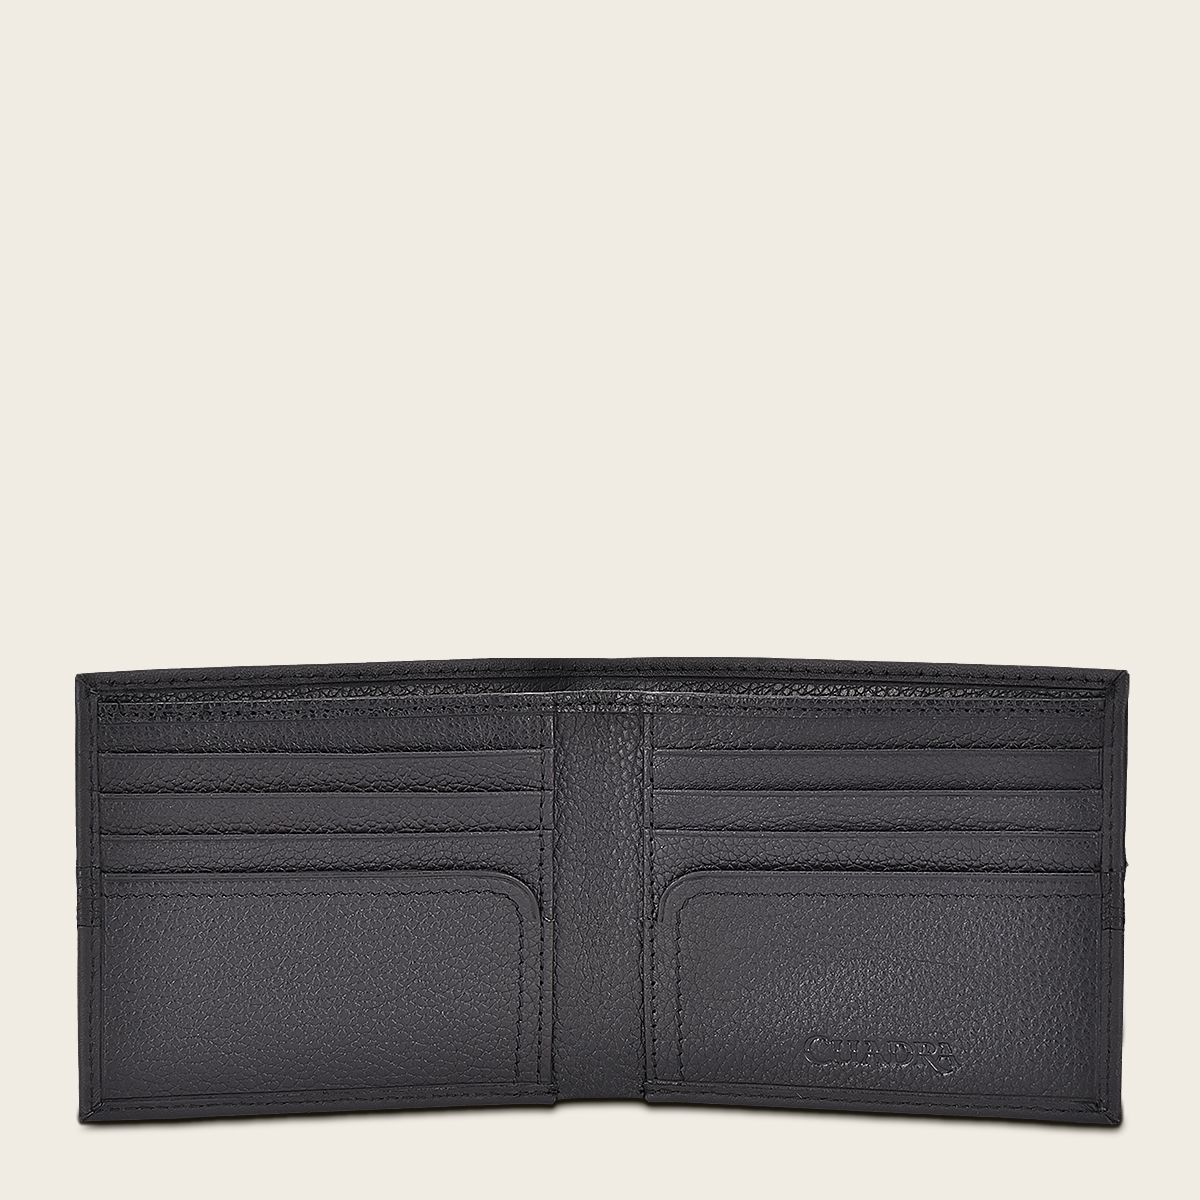 High Quality Lv Wallet+Belt Combo Rs: - Life Style Blog.Pk